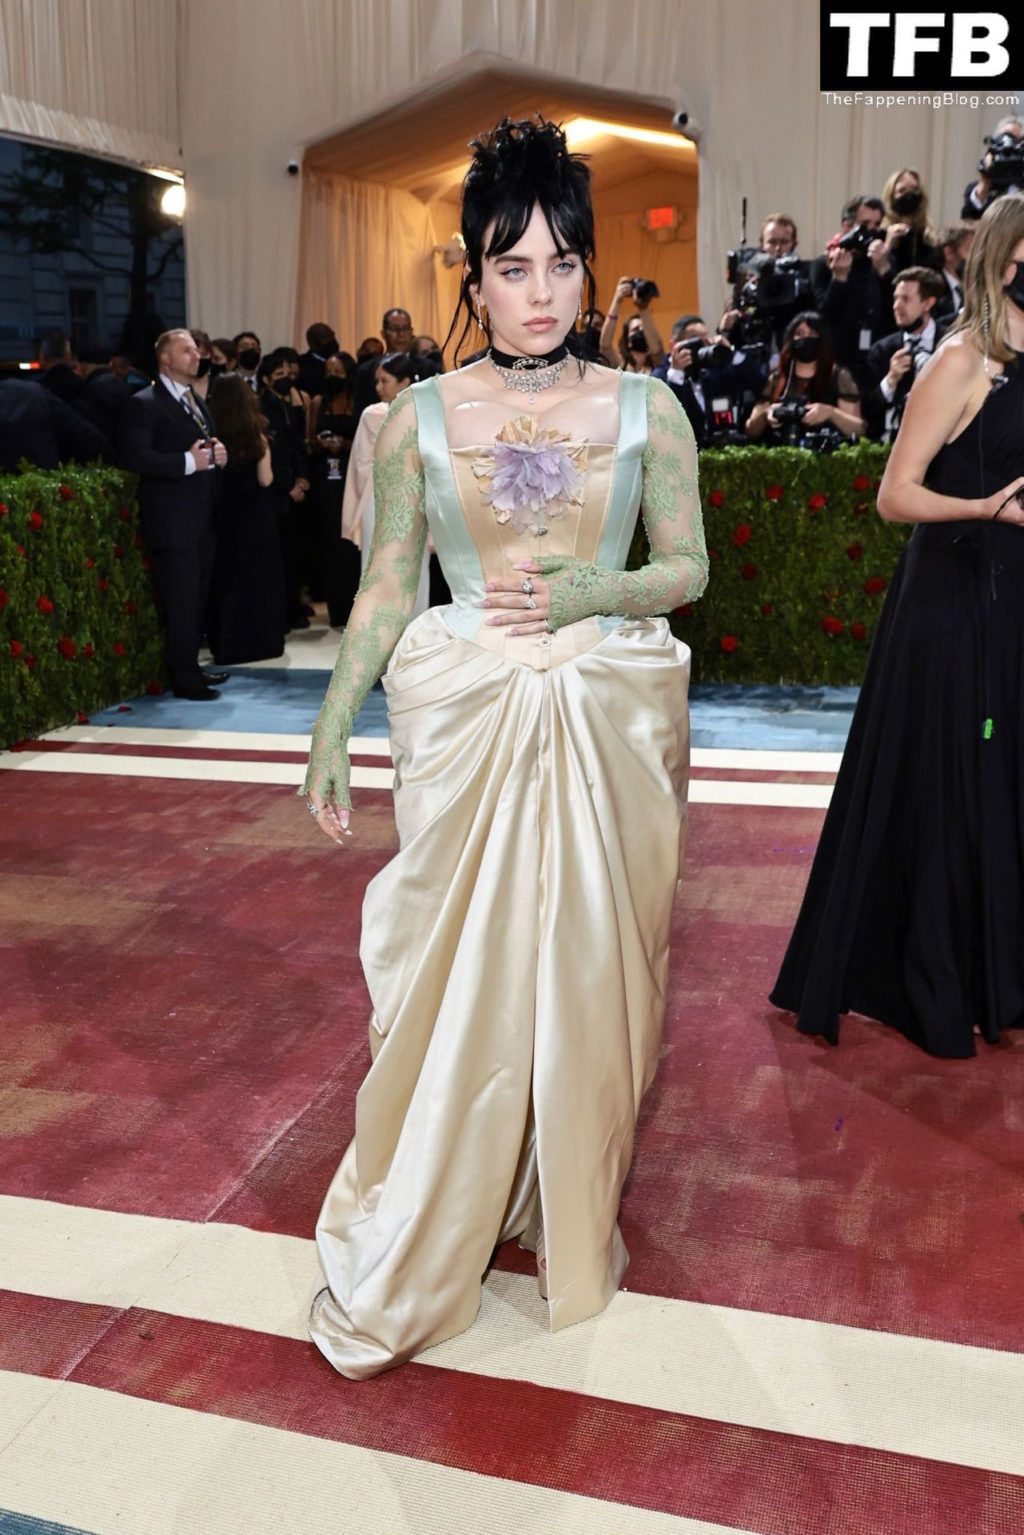 Billie Eilish Sexy The Fappening Blog 50 1024x1535 - Billie Eilish Showcases Nice Cleavage at The 2022 Met Gala in NYC (155 Photos)